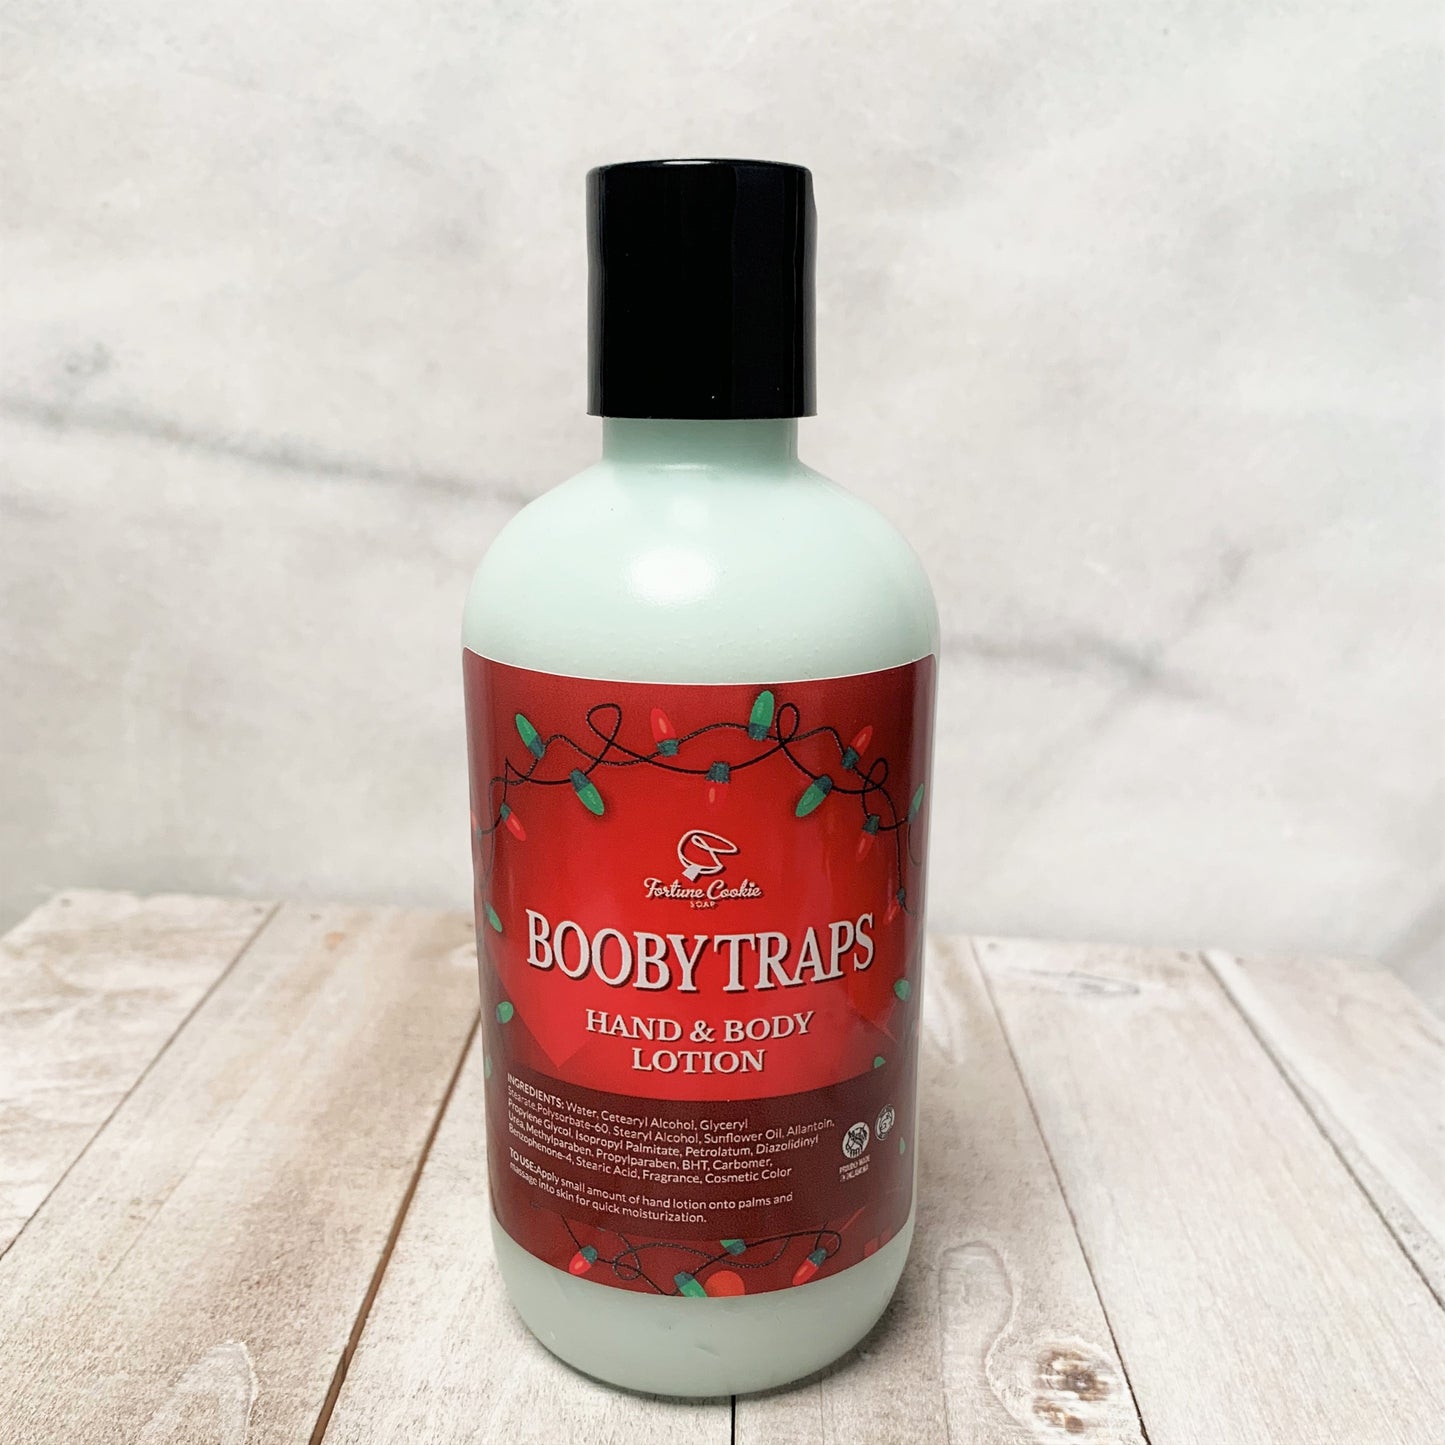 BOOBY TRAPS Hand & Body Lotion